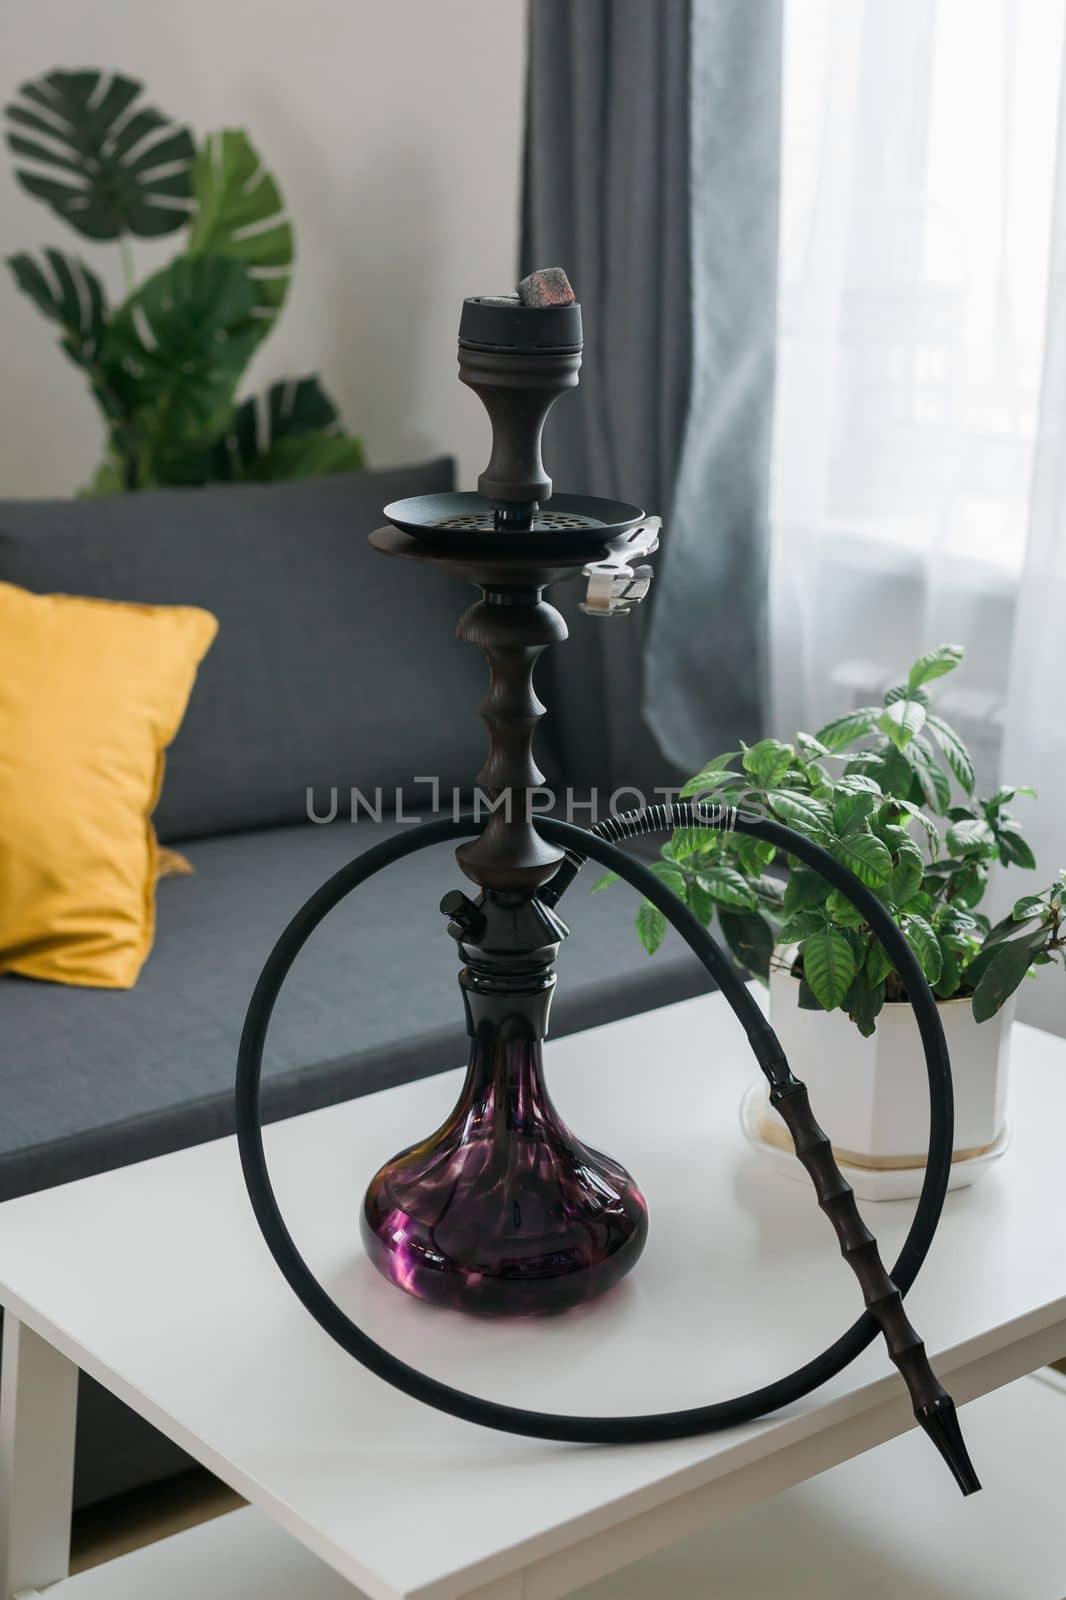 Shisha hookah bowl with red hot coals and craft tobacco. Modern hookah with coconut charcoal for relax and smoke in lounge background. by Satura86